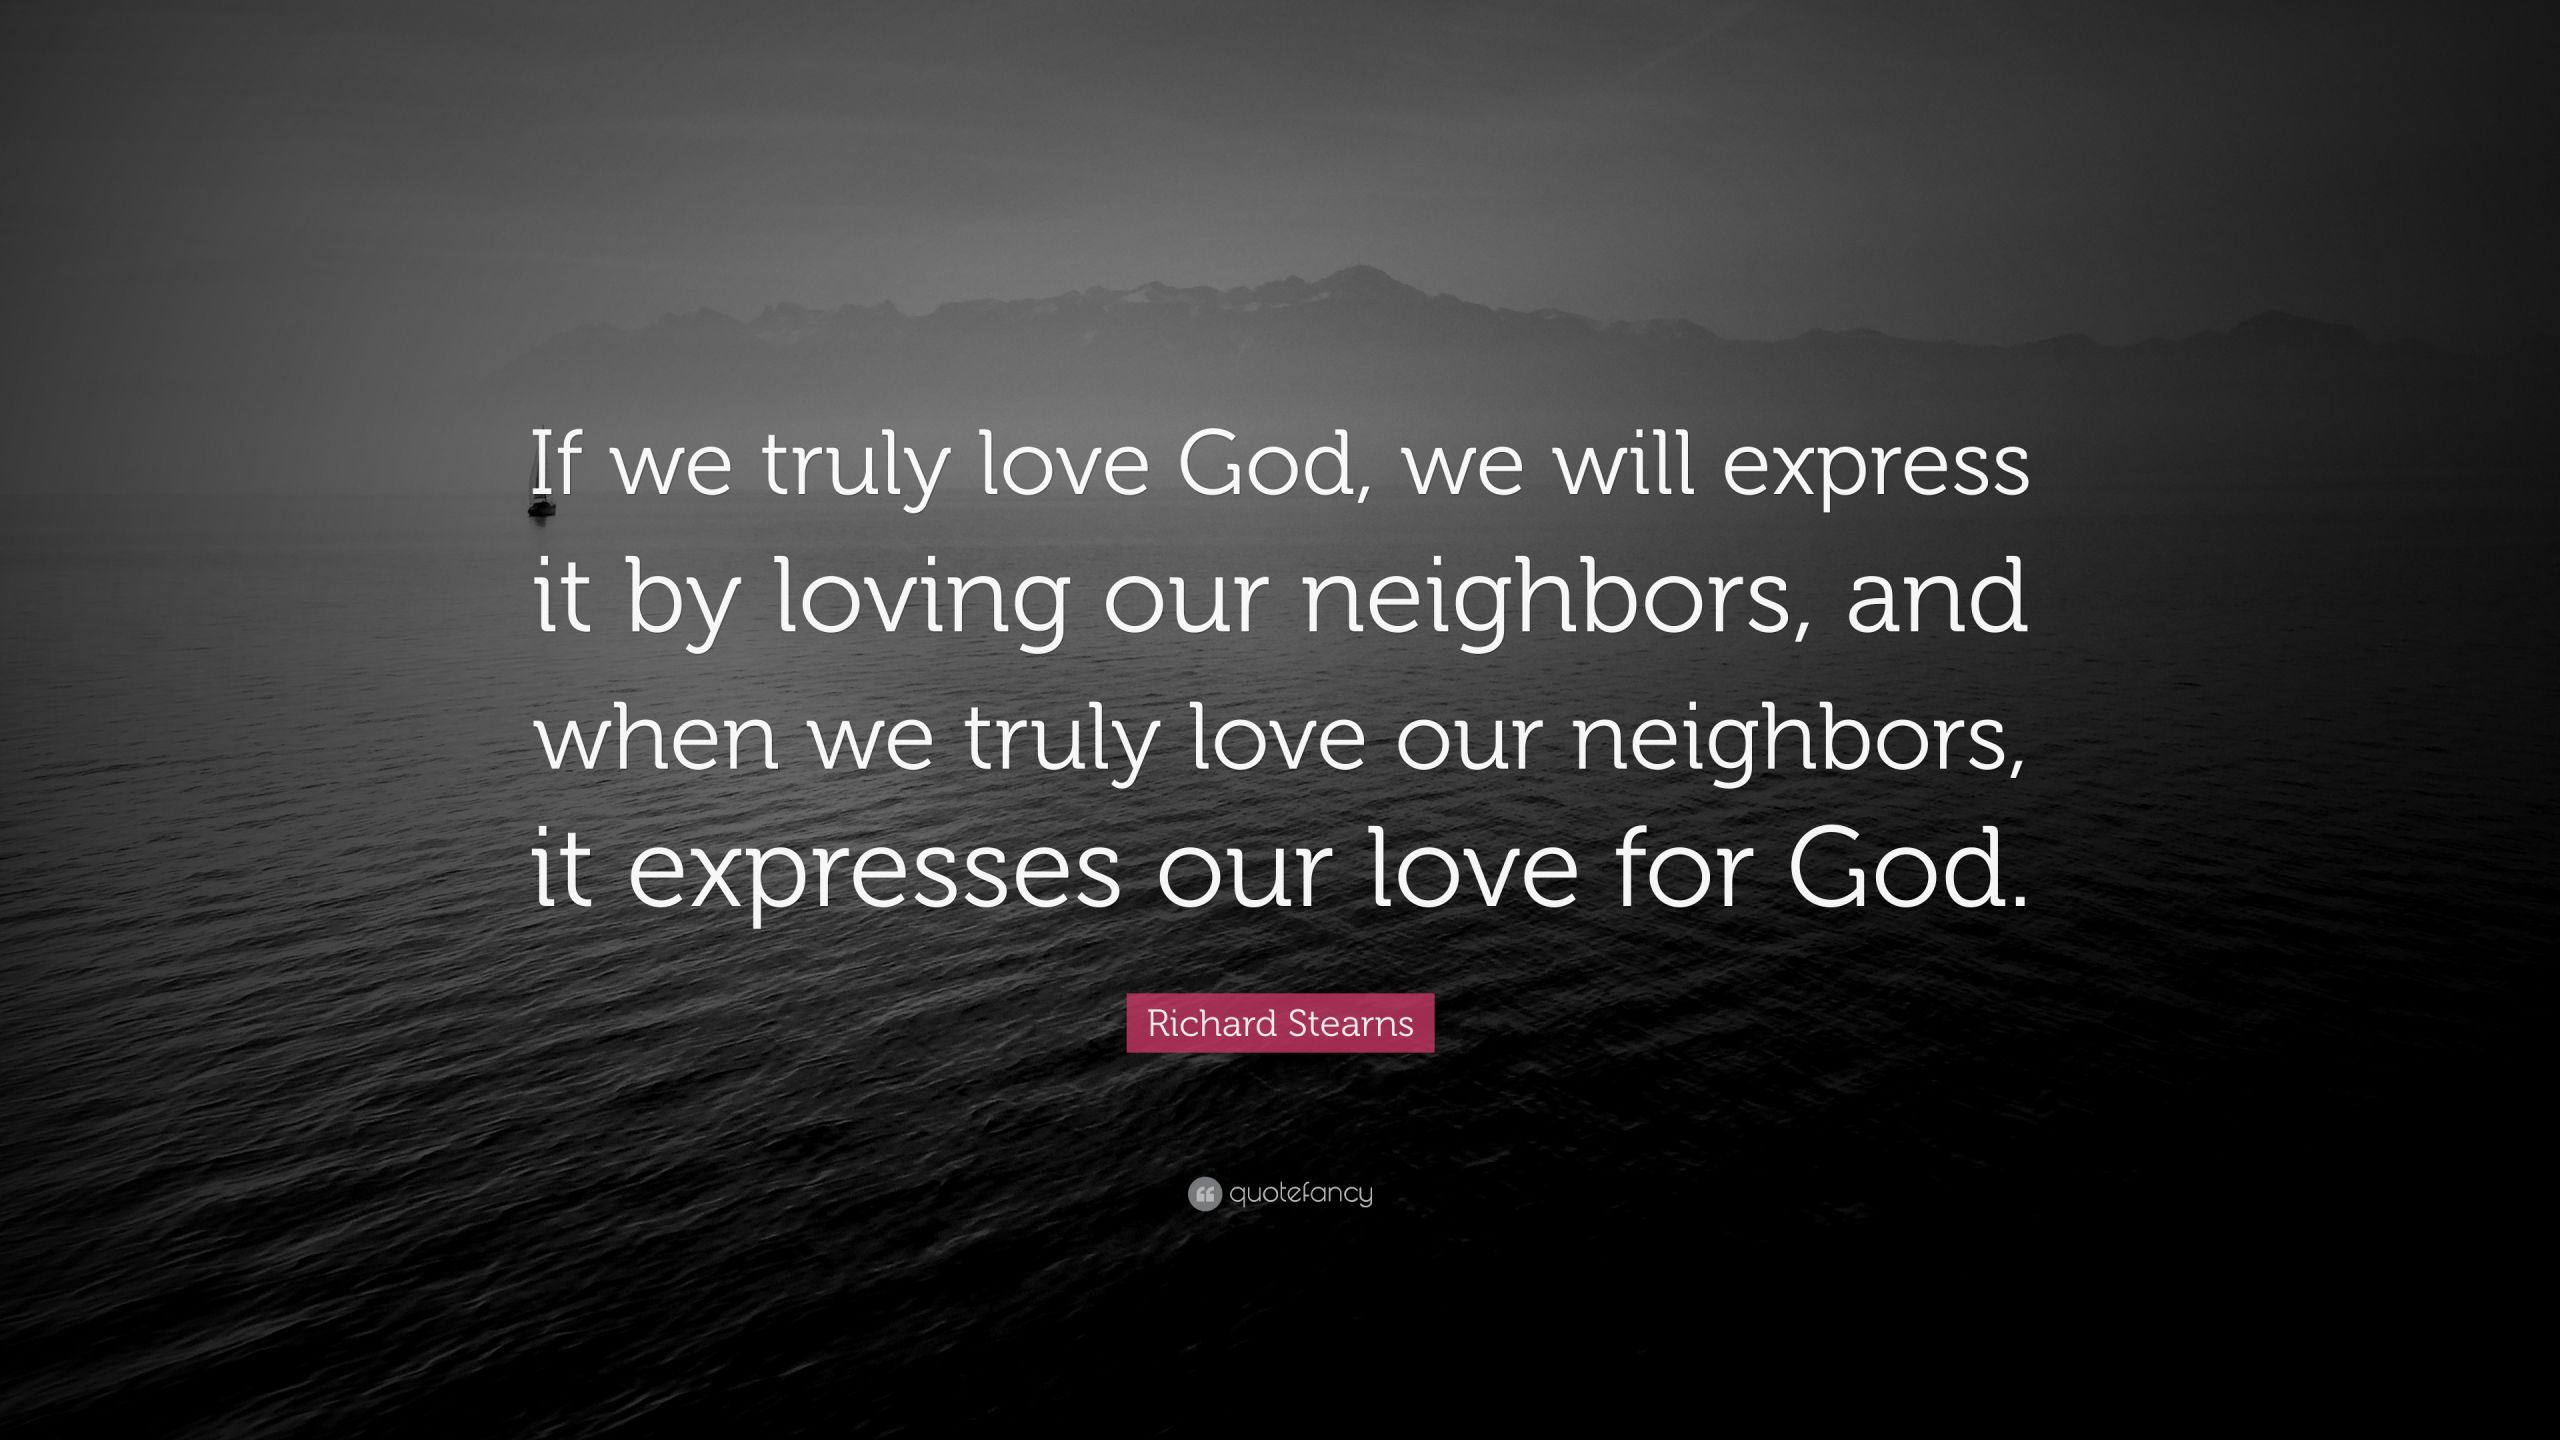 God Quotes On Love
 Richard Stearns Quote “If we truly love God we will